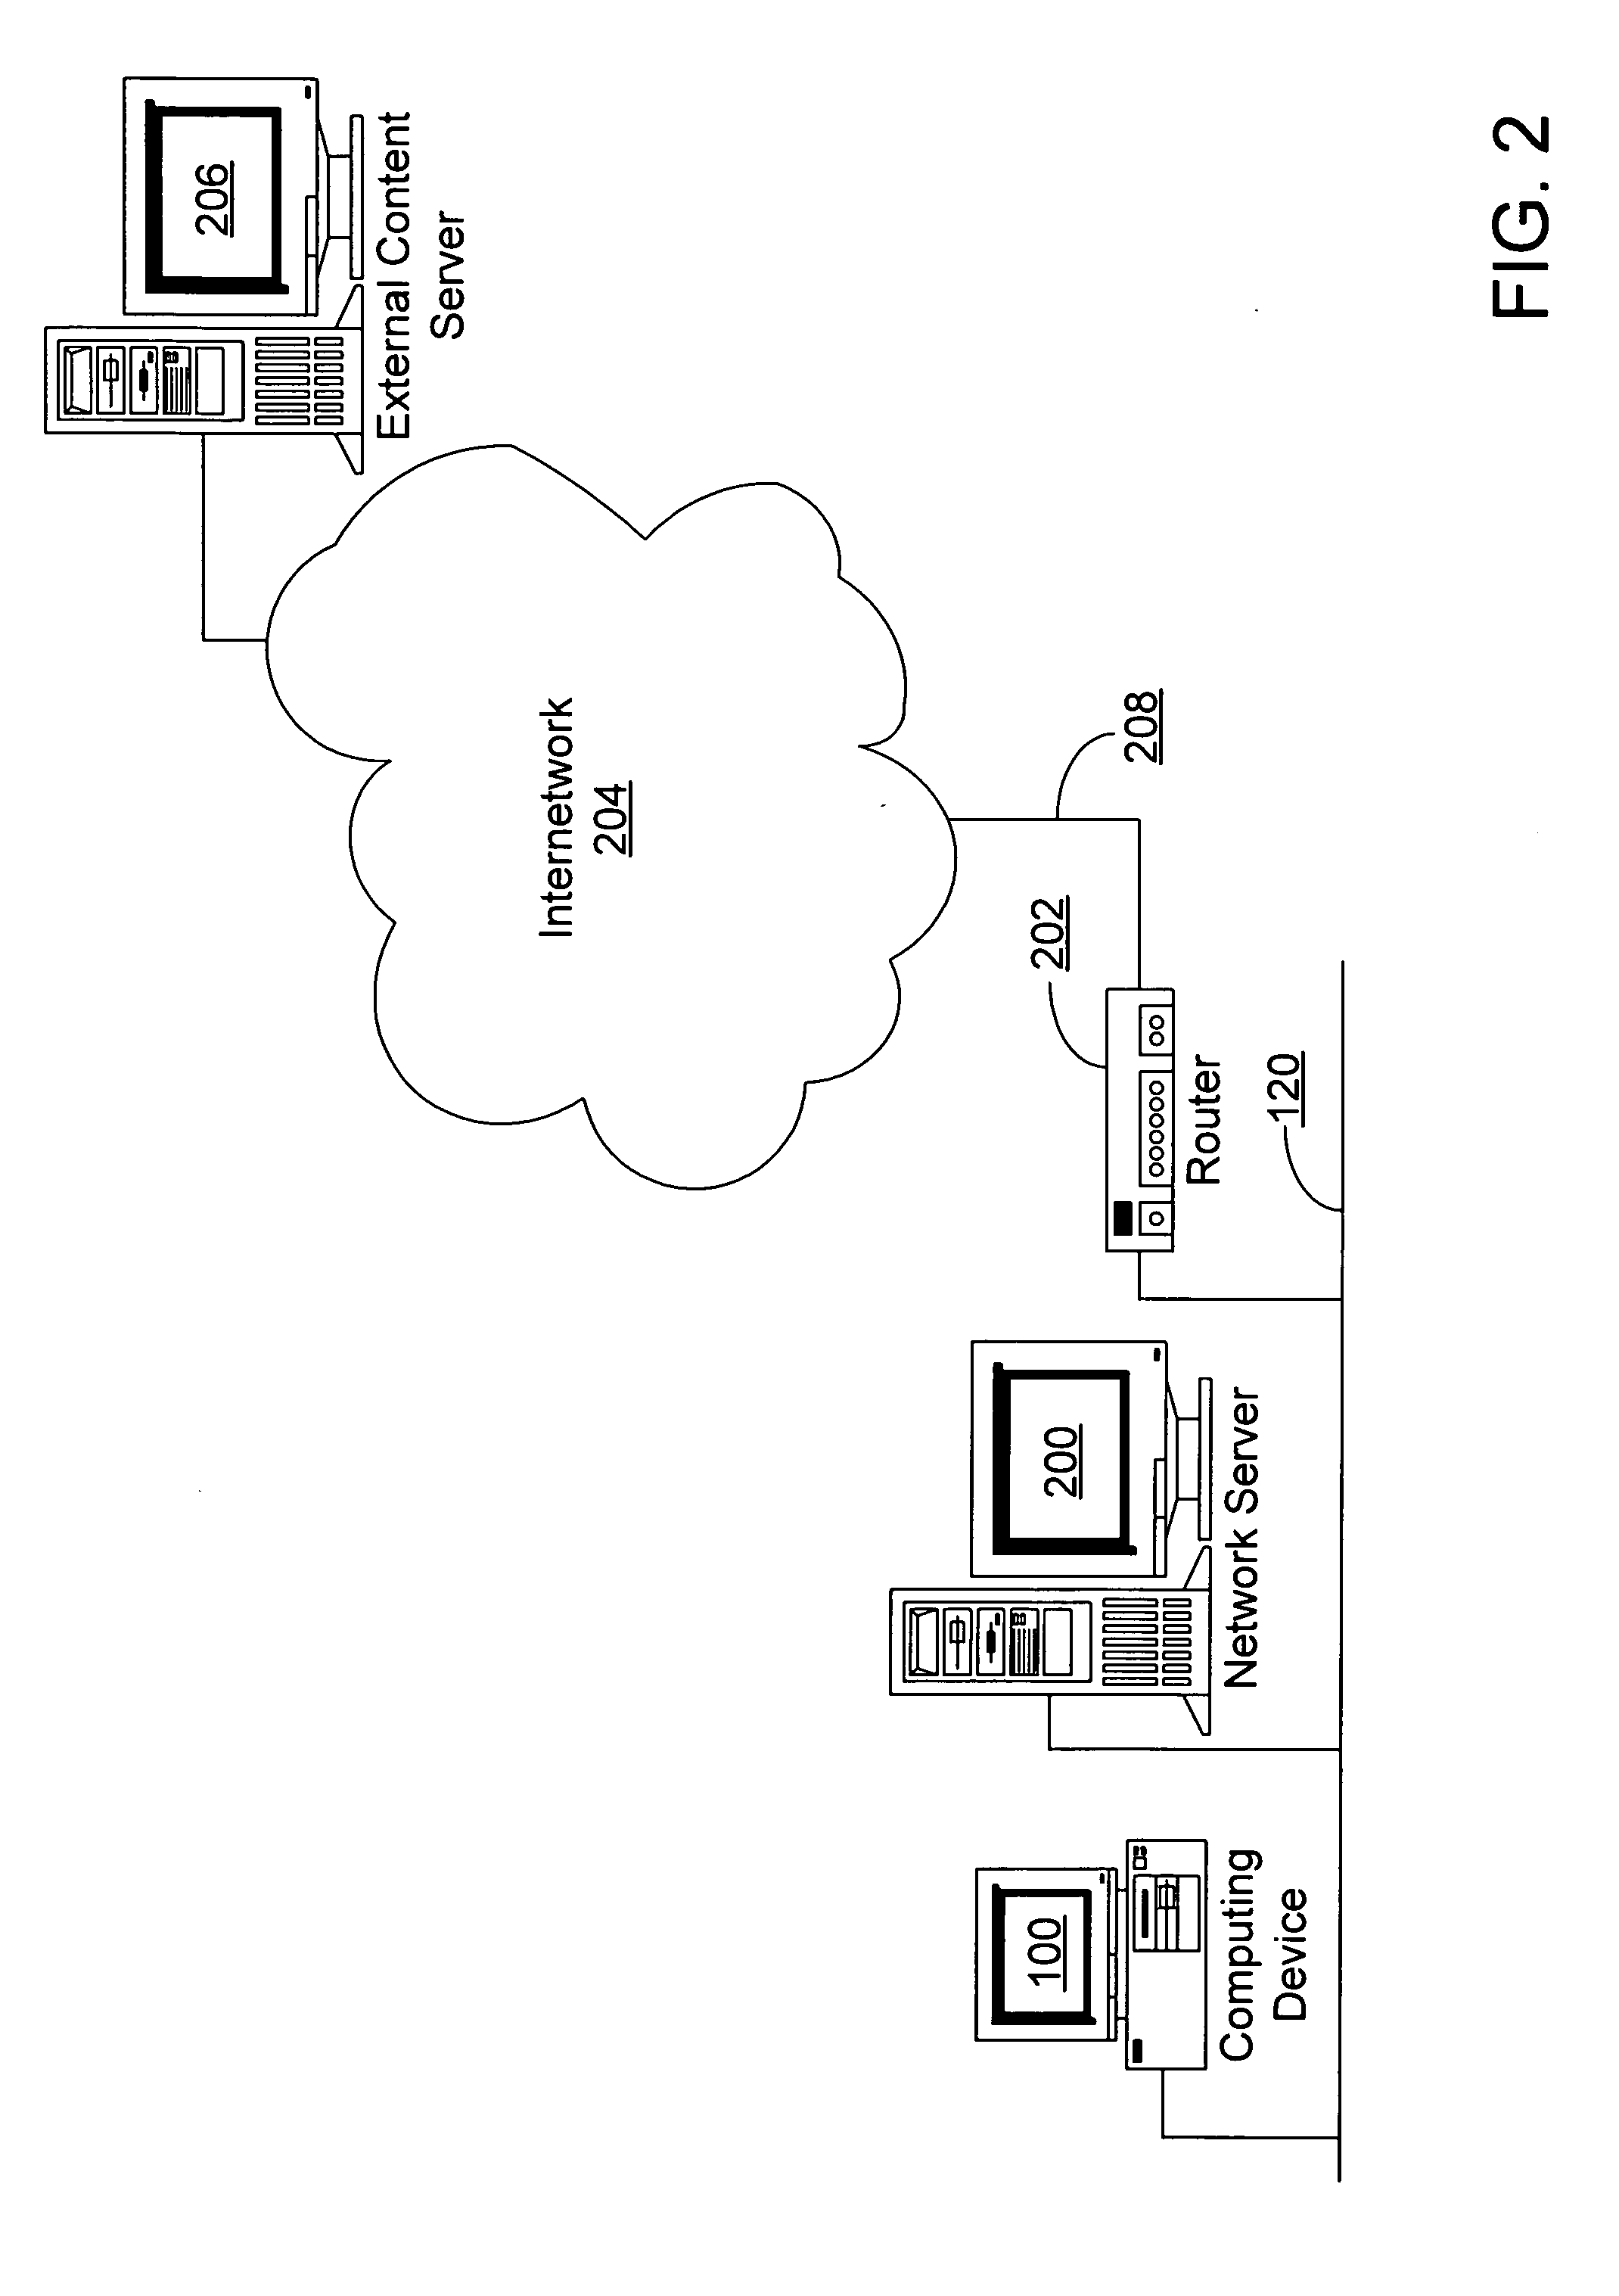 Method for efficient content distribution using a peer-to-peer networking infrastructure